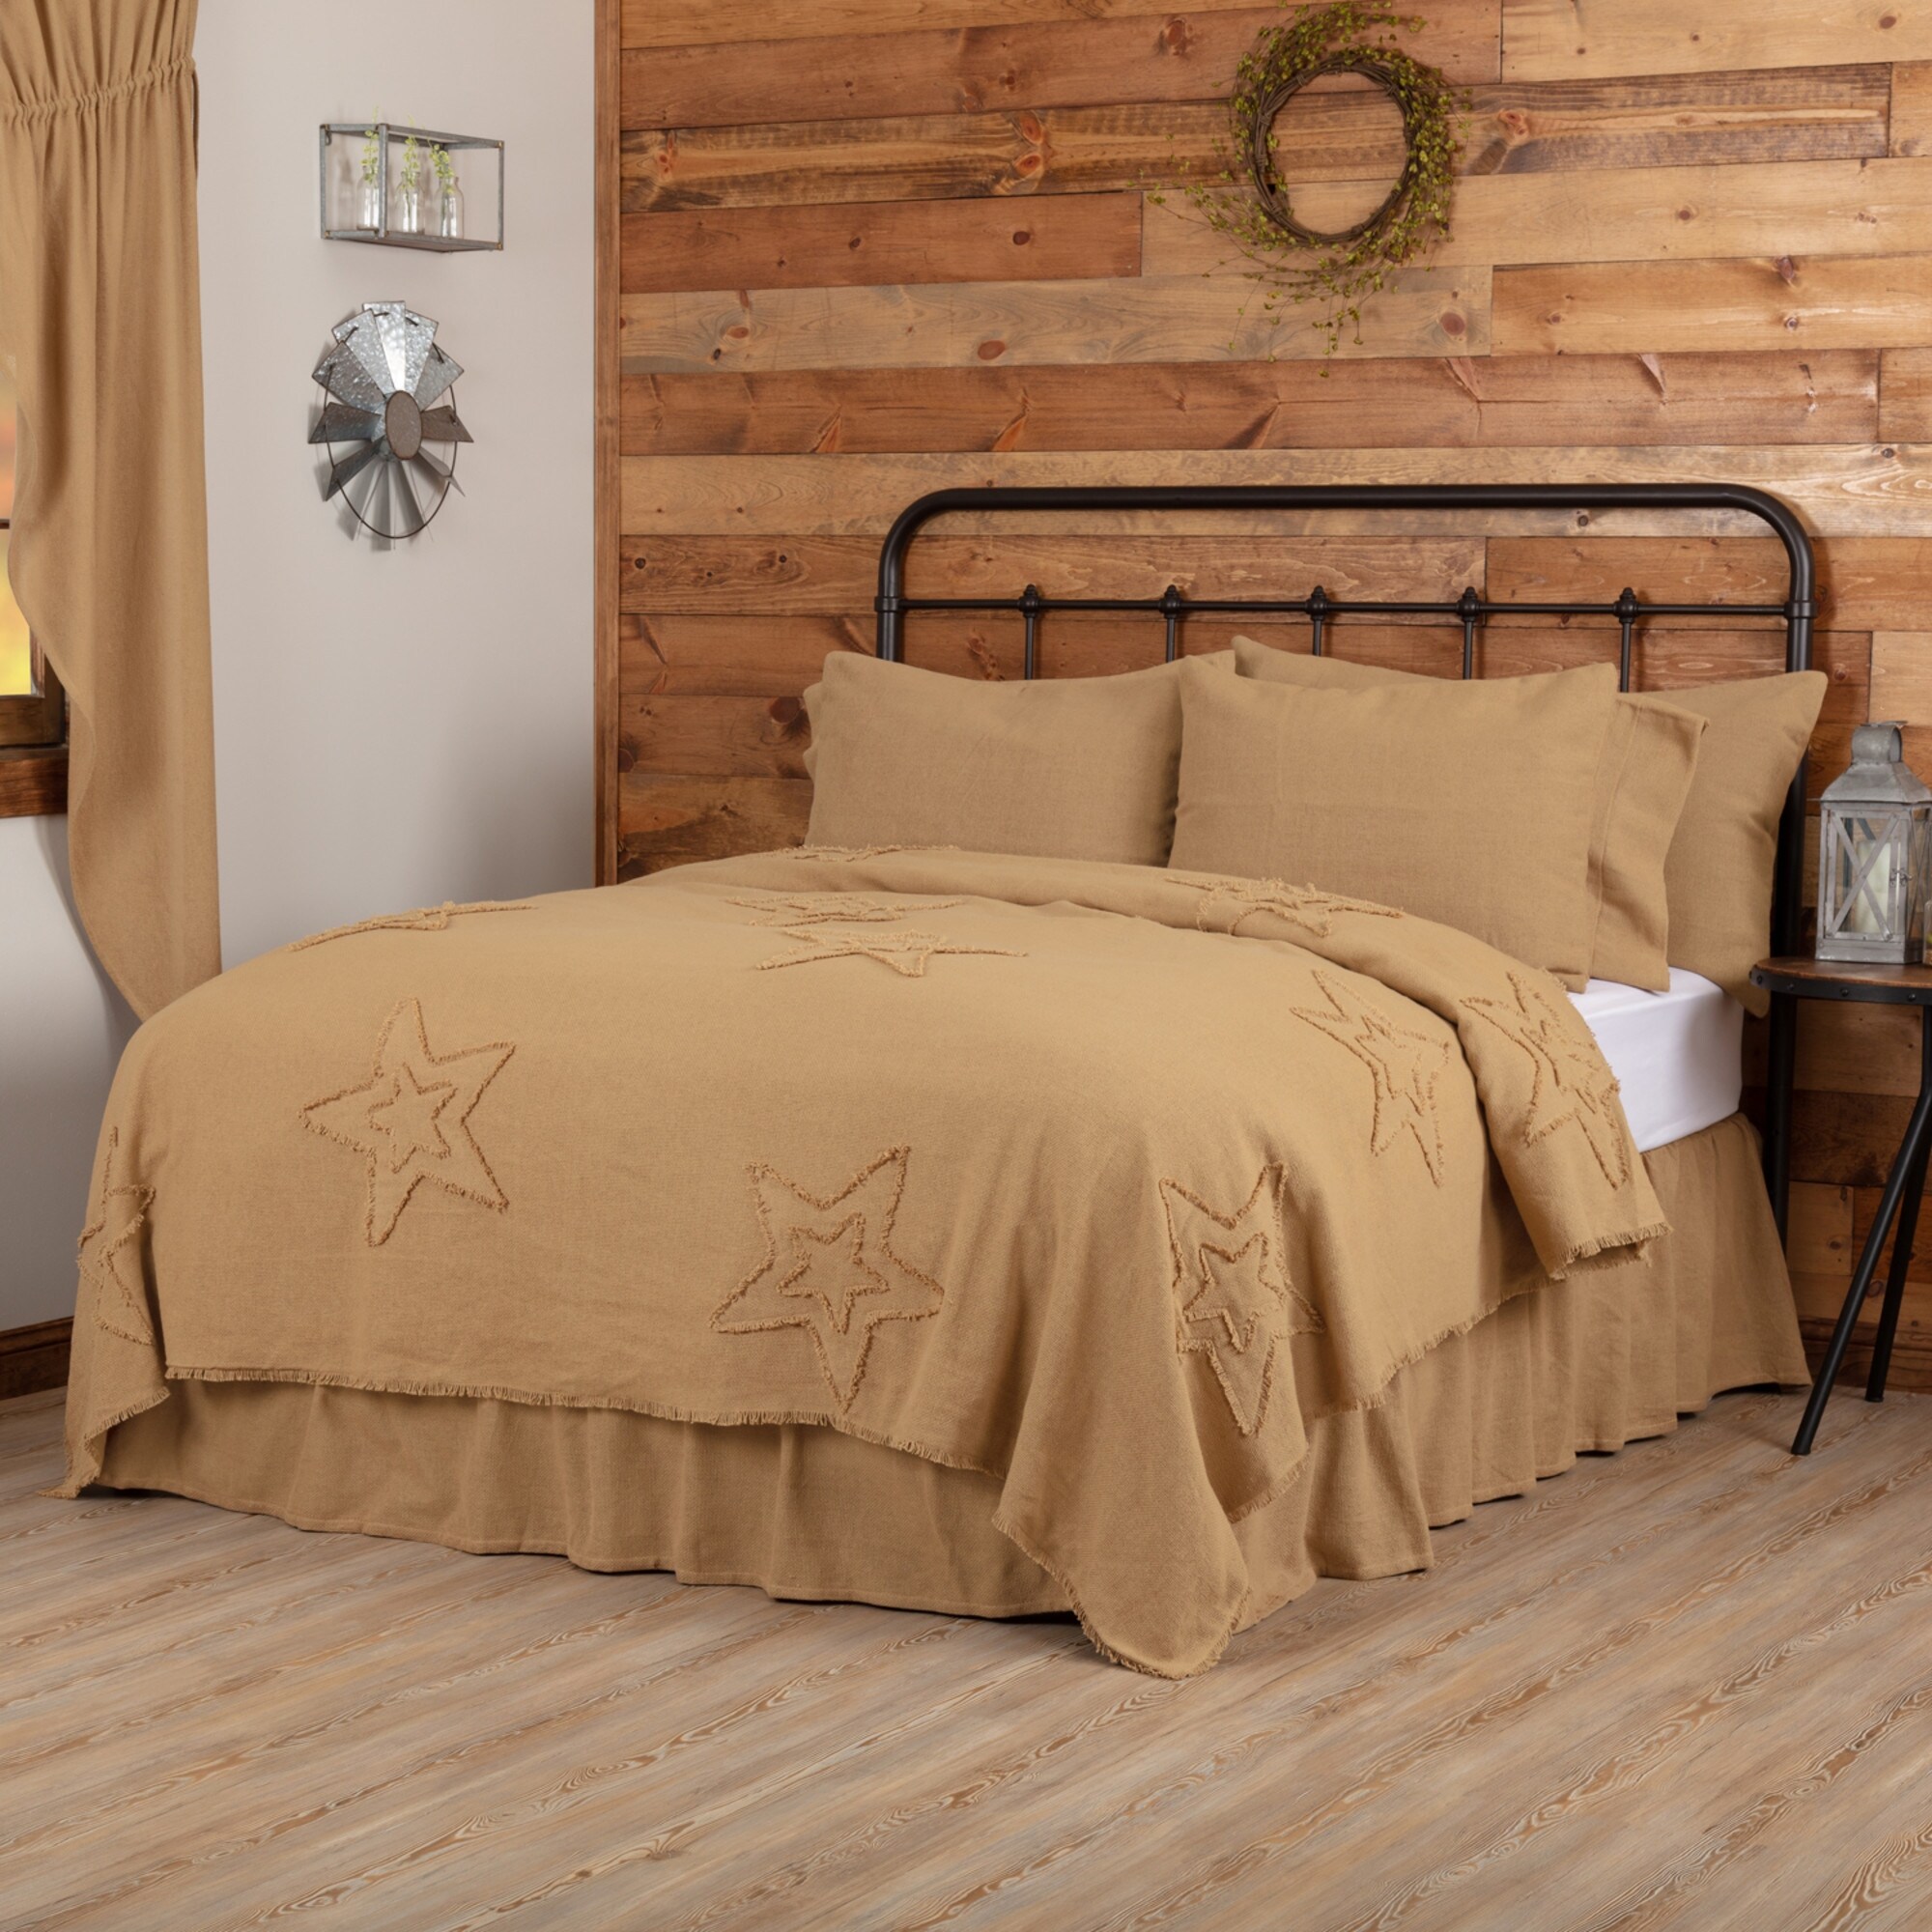 https://ak1.ostkcdn.com/images/products/is/images/direct/7f12e294acb828aa50db85d0c323b58e71703de6/Farmhouse-Bedding-VHC-Cotton-Burlap-Star-Coverlet-Distressed-Appearance.jpg